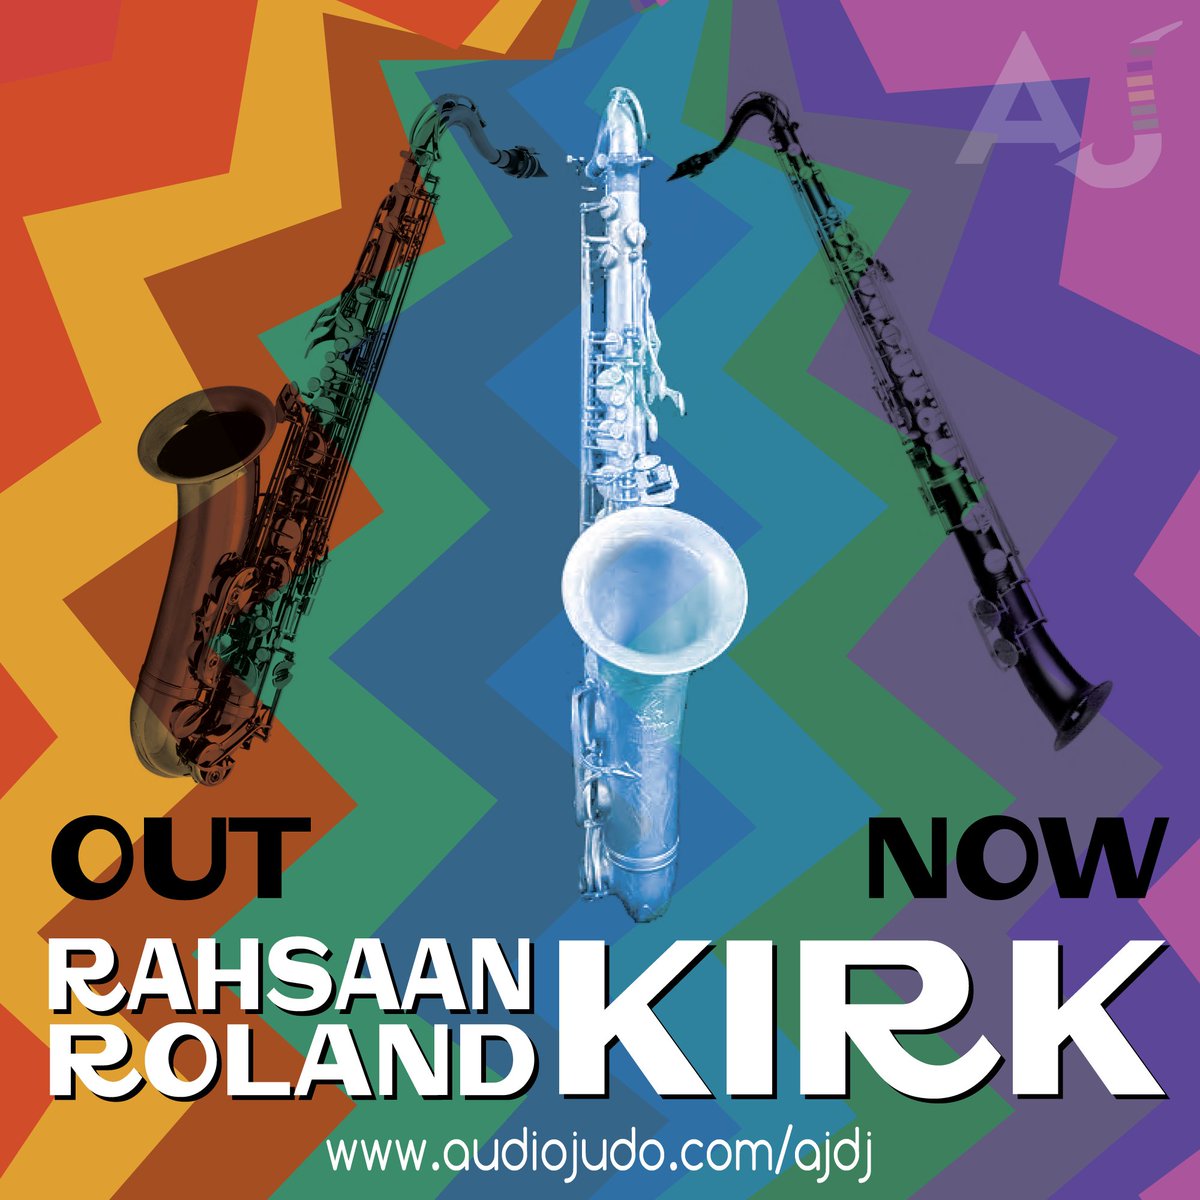 For this week's episode, Chris talks about multi-instrumentalist (and I mean multiple instruments at the SAME TIME!) Rahsaan Roland Kirk.  audiojudo.com  @PantheonPods 

#audiojudo #pantheonpodcasts #jazzpodcast  #threehornsatthesametime